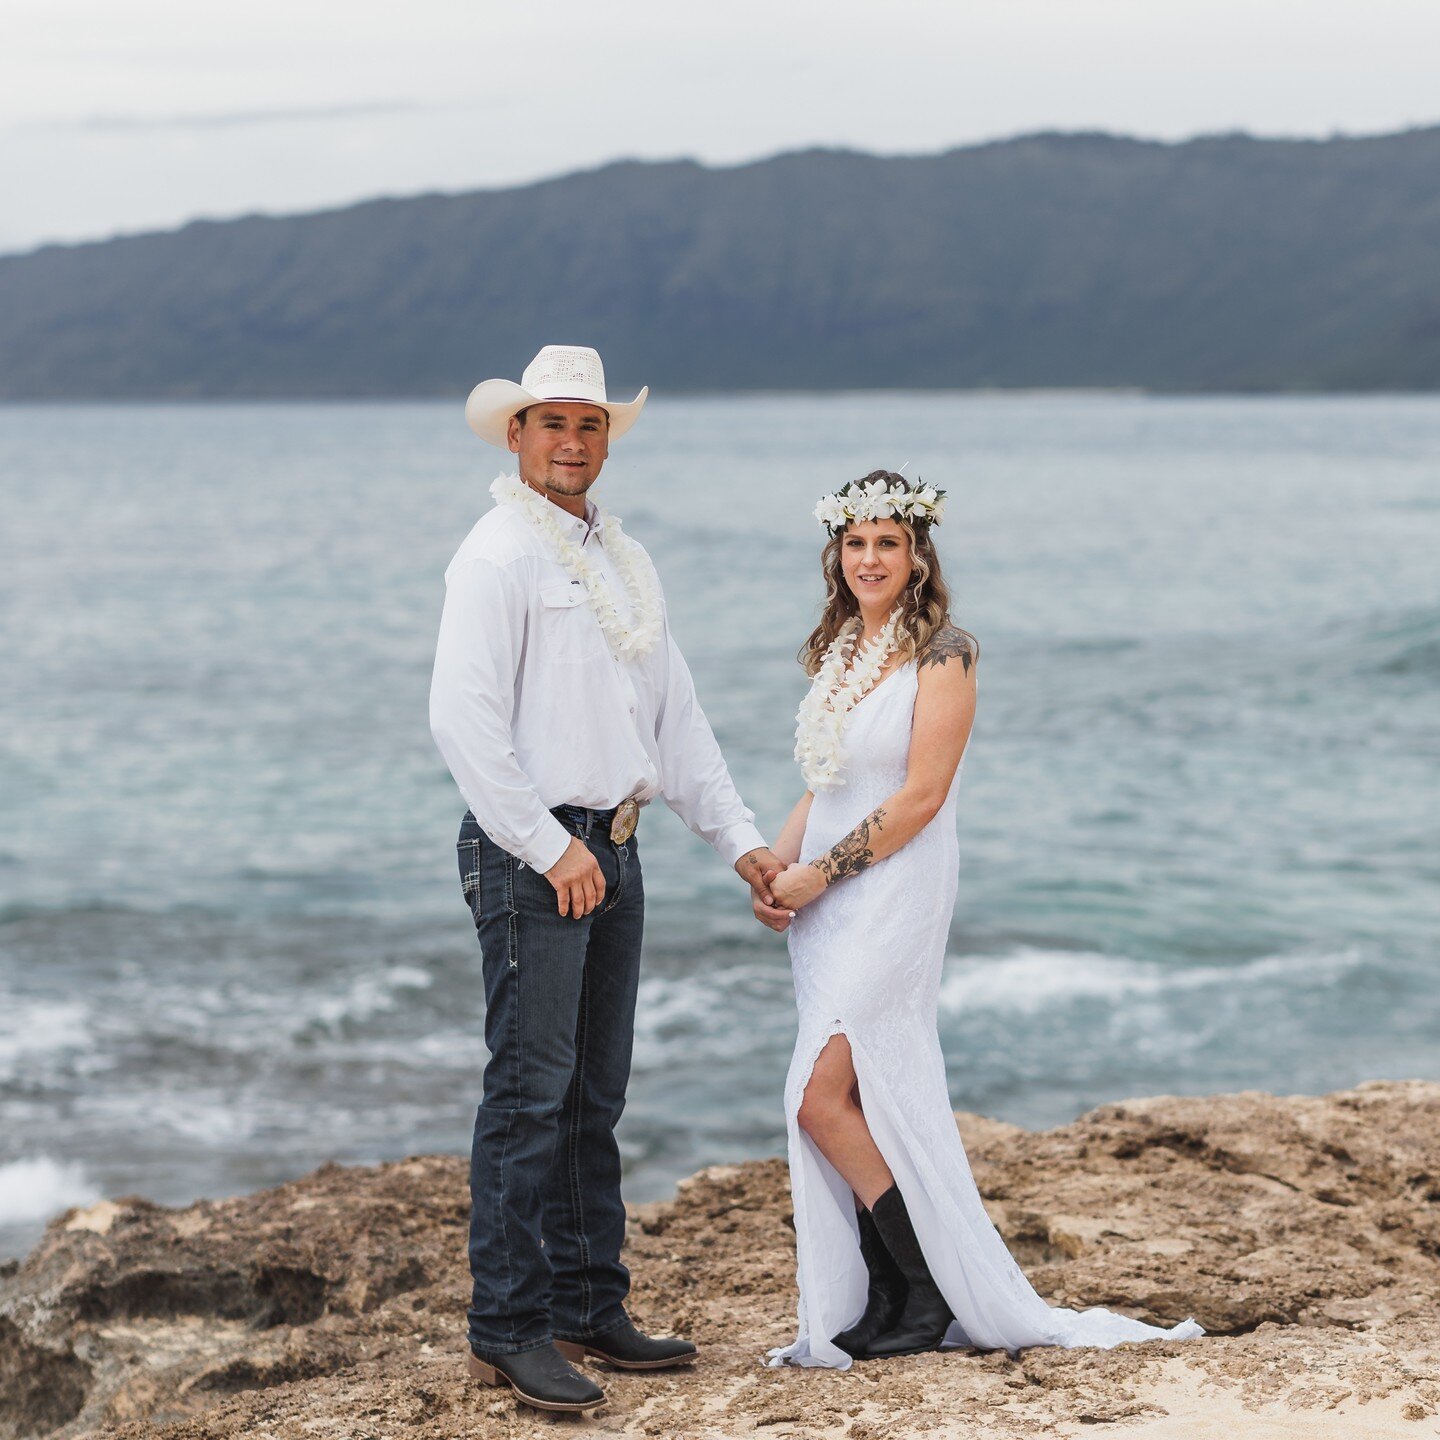 Cowboy hats 🤠 and boots 🥾 for this ceremony on the westside of Oahu! How fitting 💞 Sending Aloha to this cowboy and cowgirl!

#oahuofficiant #hawaiiofficiant #oahuelopement #hawaiielopement #hawaiiwedding #oahuwedding #oahuweddingminister #hawaiiw